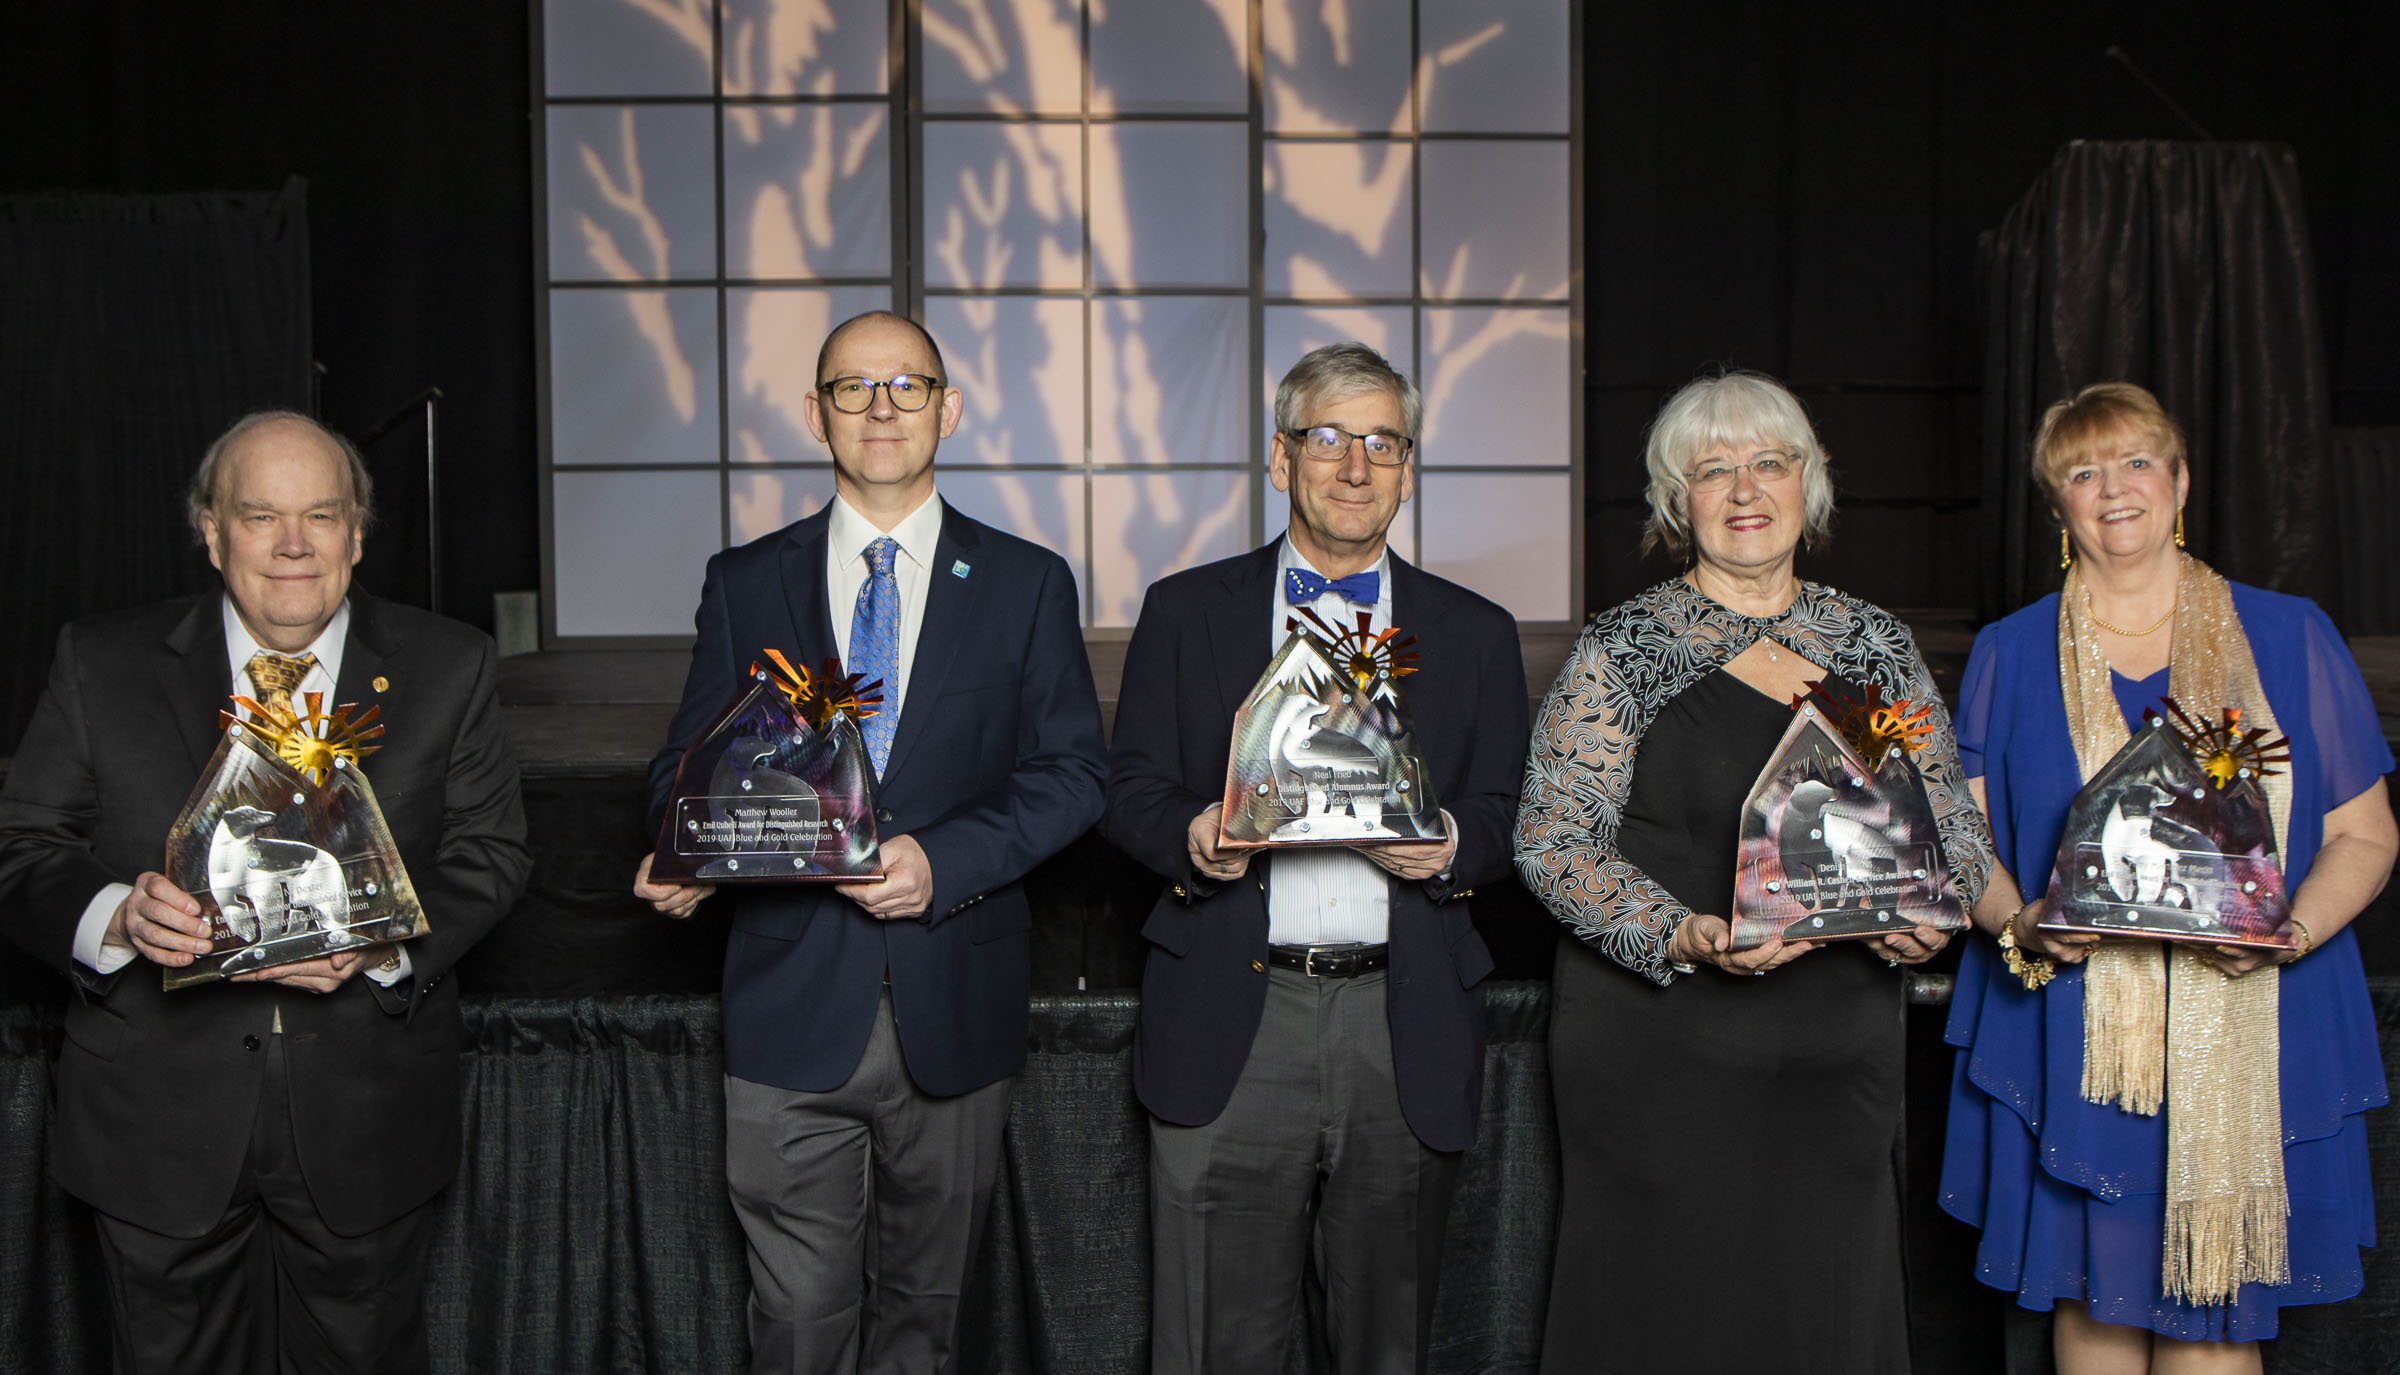 Nanook Nation celebrated the distinguished faculty and alumnus awards at the 2019 Blue and Gold Celebration on Feb. 16 at the Carlson Center. UAF photo by JR Ancheta.